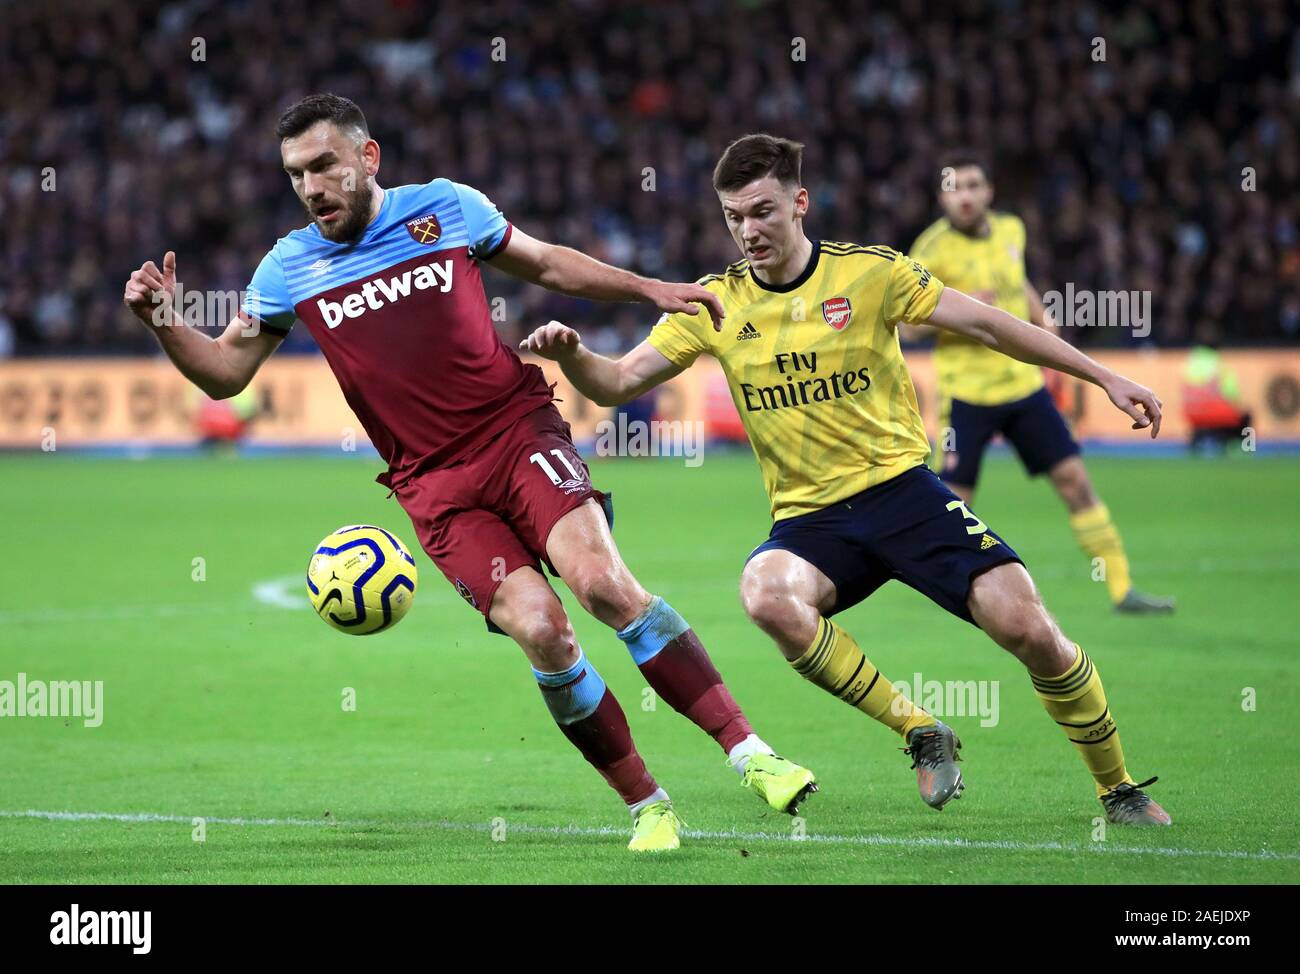 West Ham United's Robert Snodgrass (left) and Arsenal's Kieran Tierney battle for the ball during the Premier League match at the London Stadium, London. Stock Photo